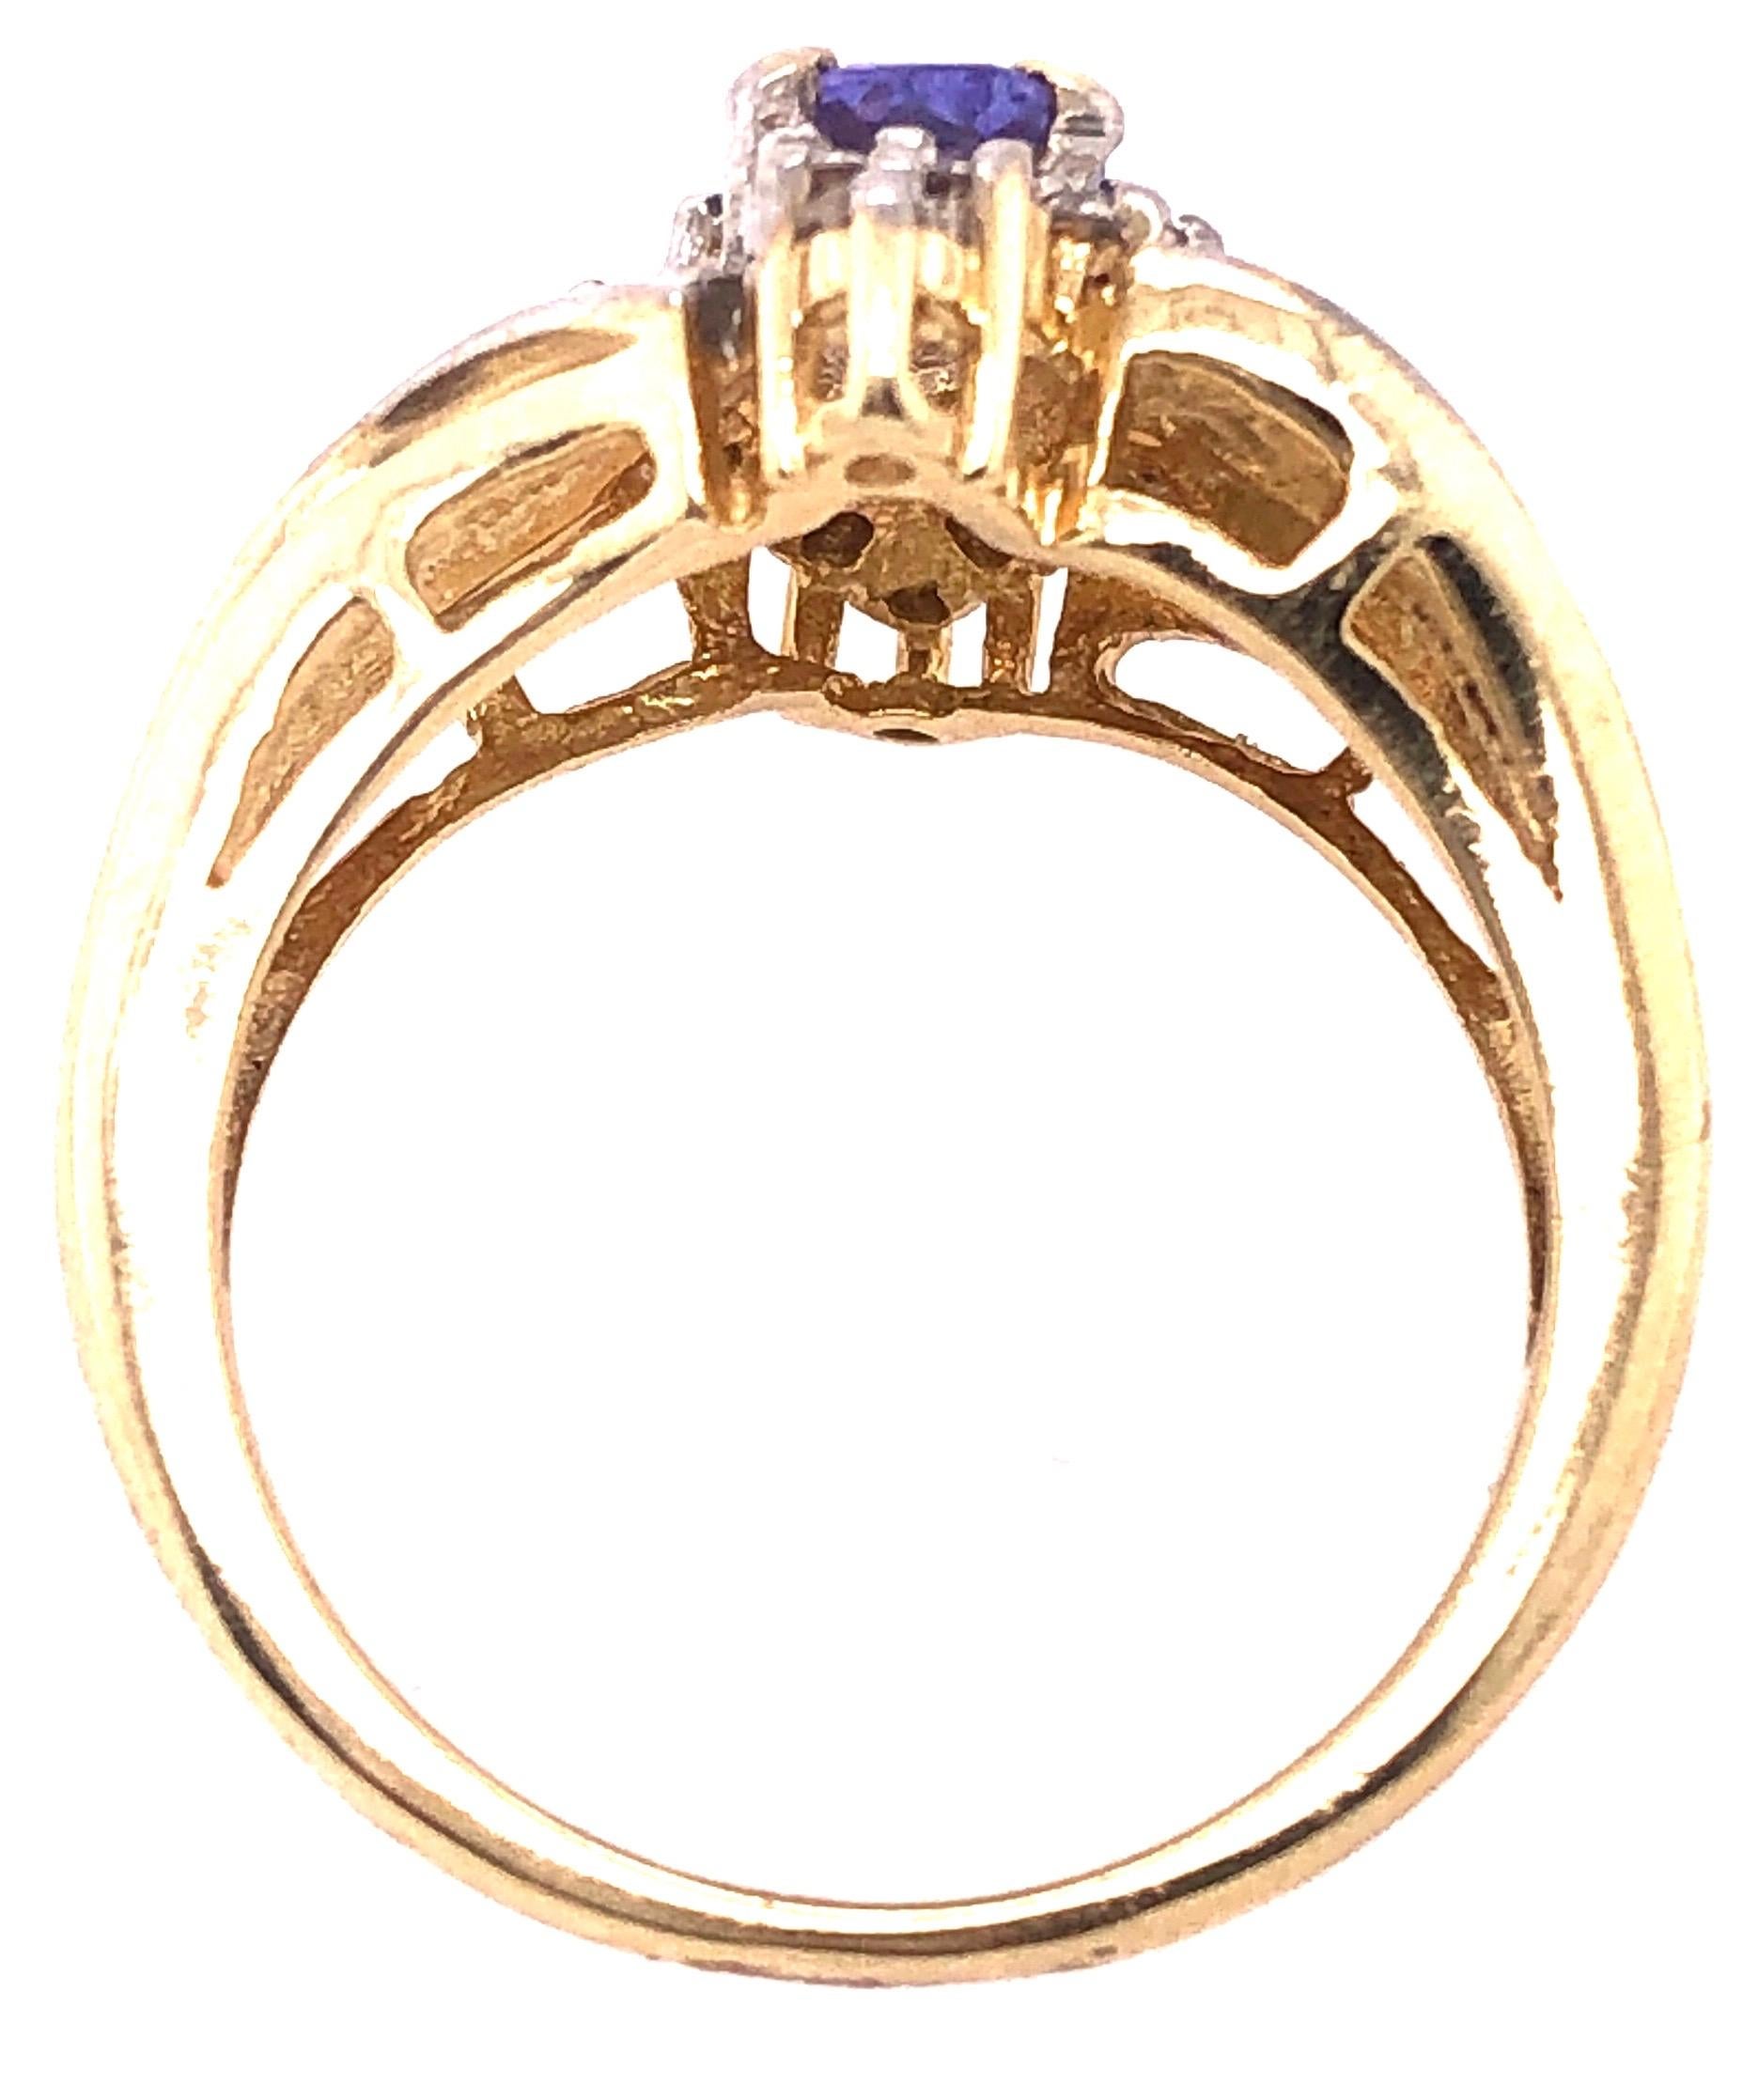 14 Karat Yellow Gold Contemporary Ring with Topaz and Diamonds.
Size 6
6 grams total weight.